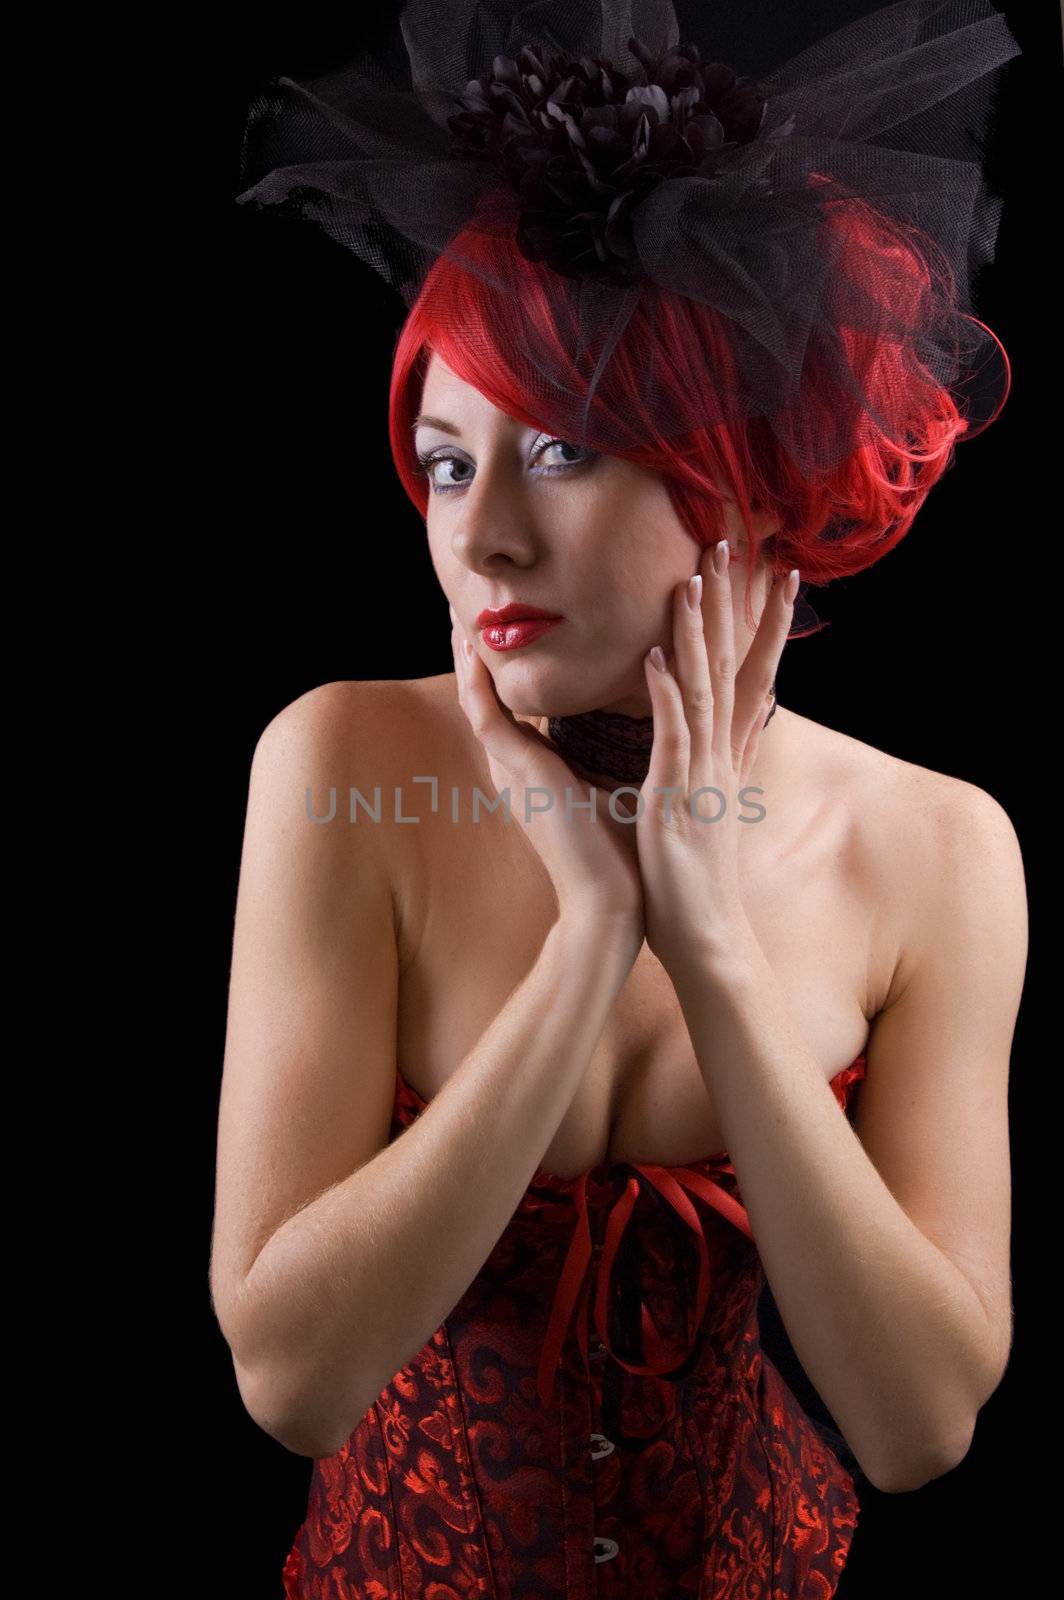 Red-headed woman in corset by Angel_a